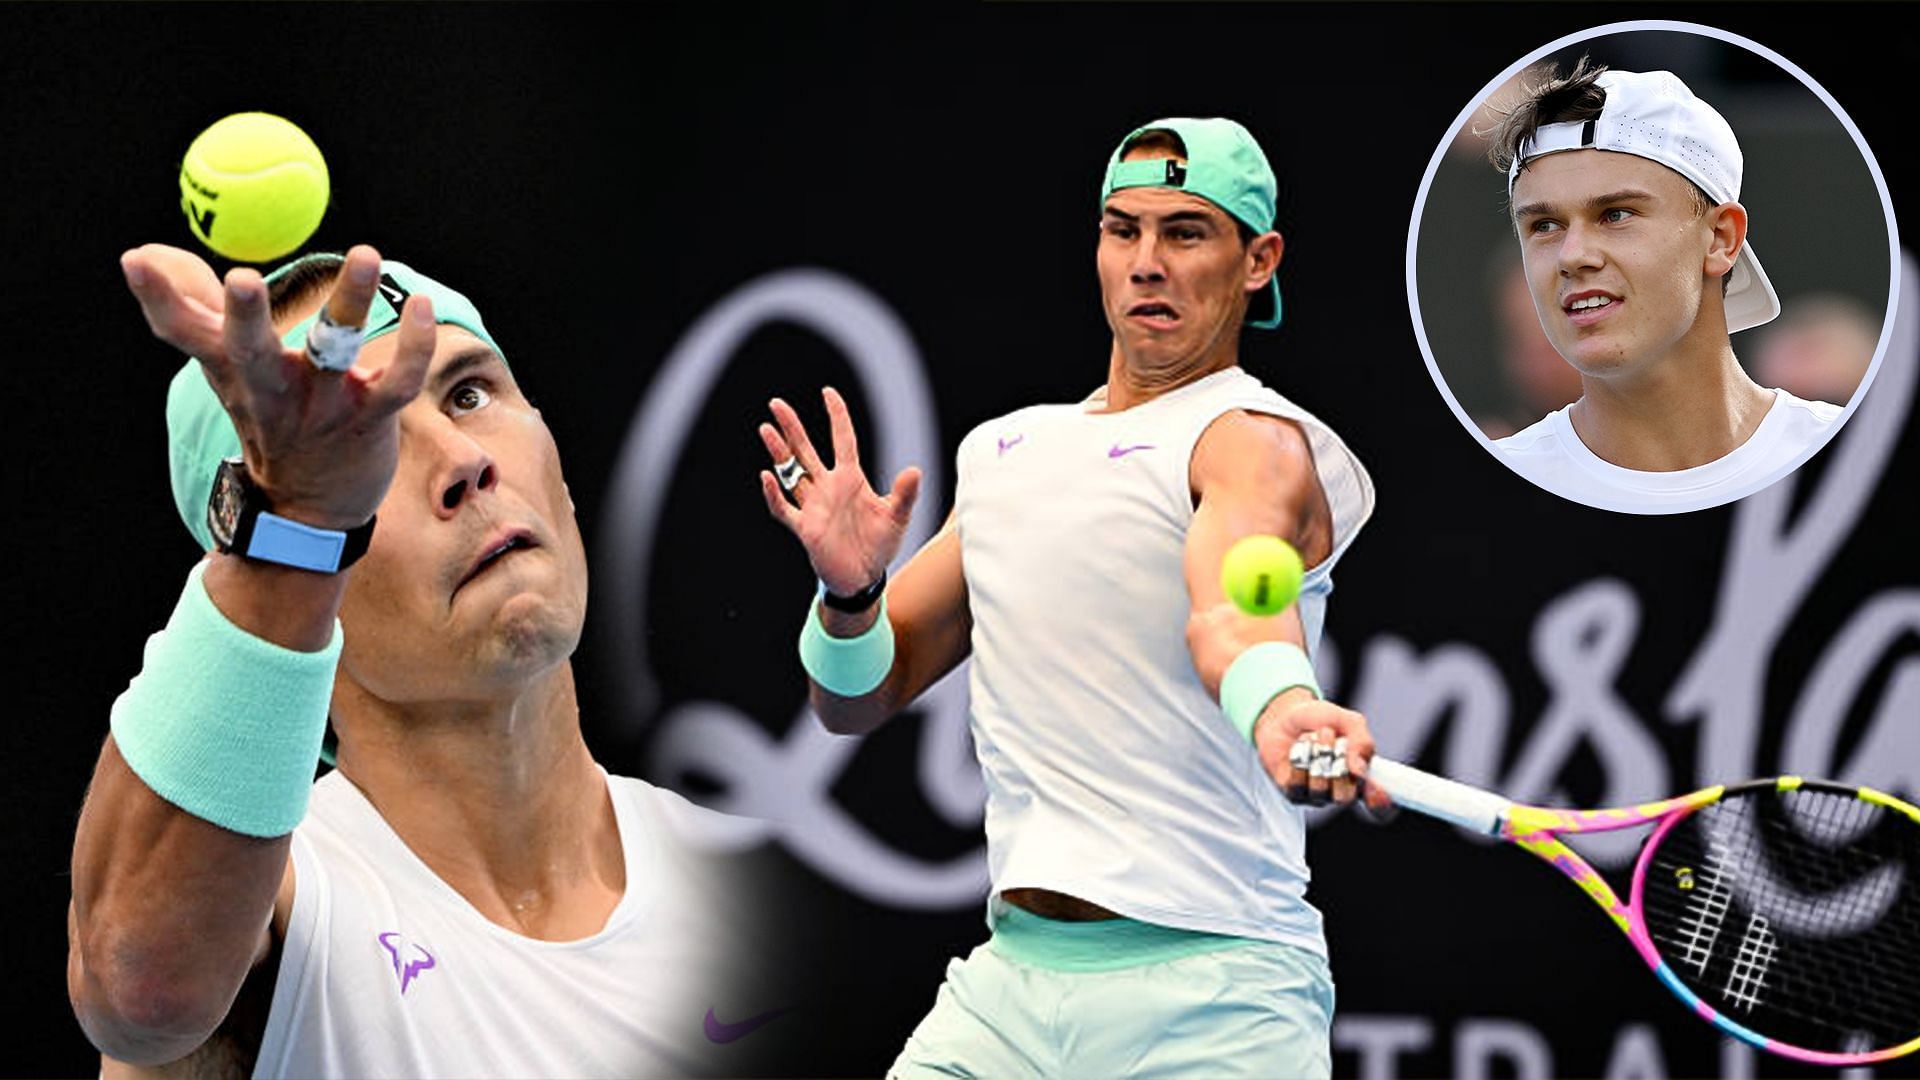 Rafael Nadal recently practiced with Holger Rune ahead of his return to action in Brisbane.